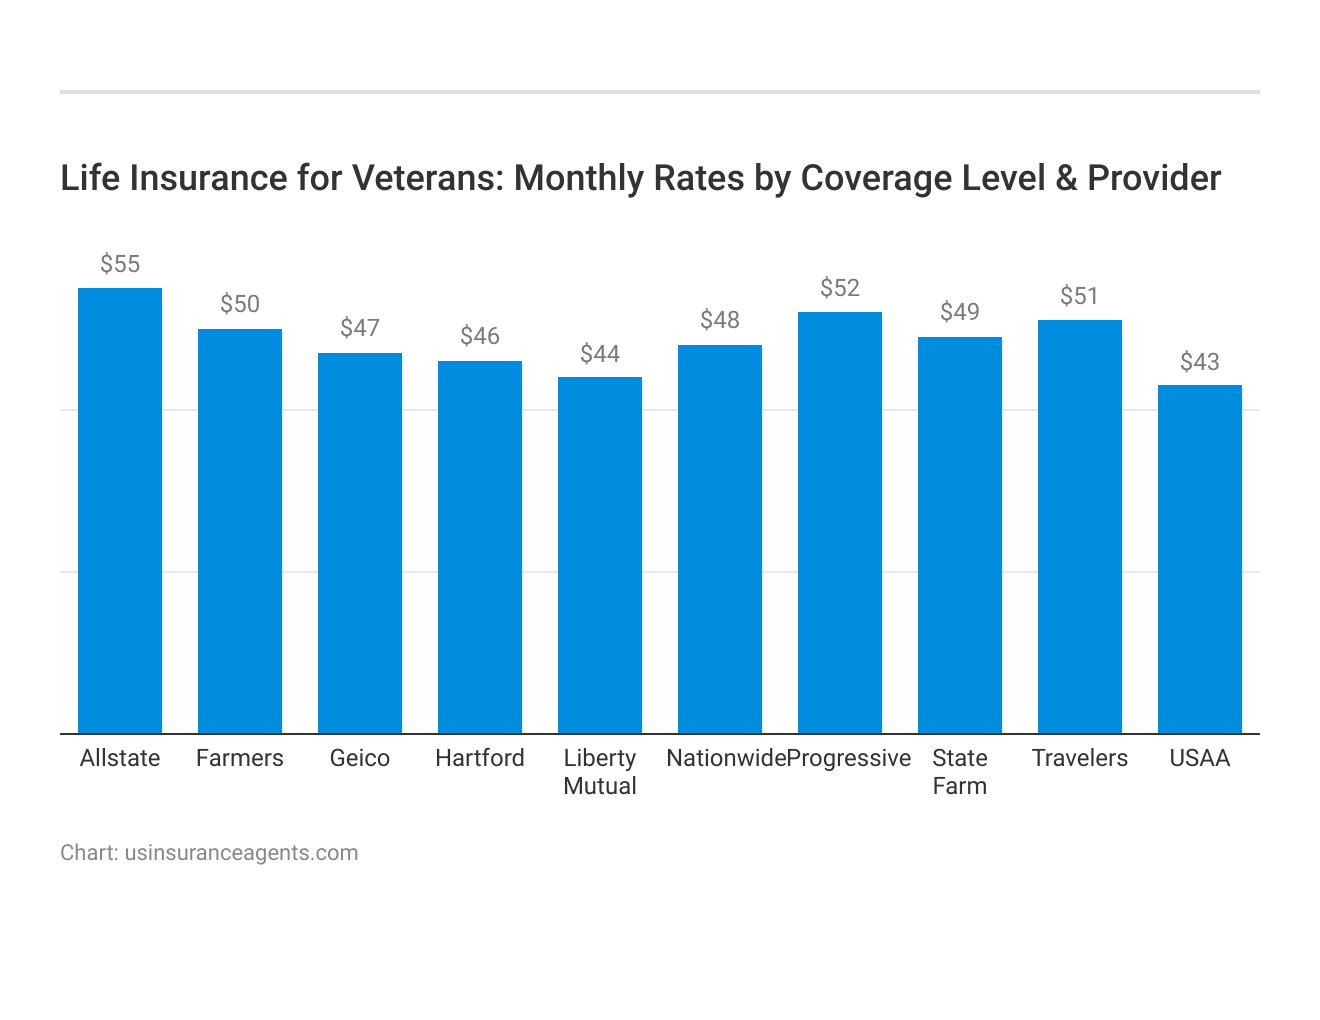 <h3>Life Insurance for Veterans: Monthly Rates by Coverage Level & Provider</h3>